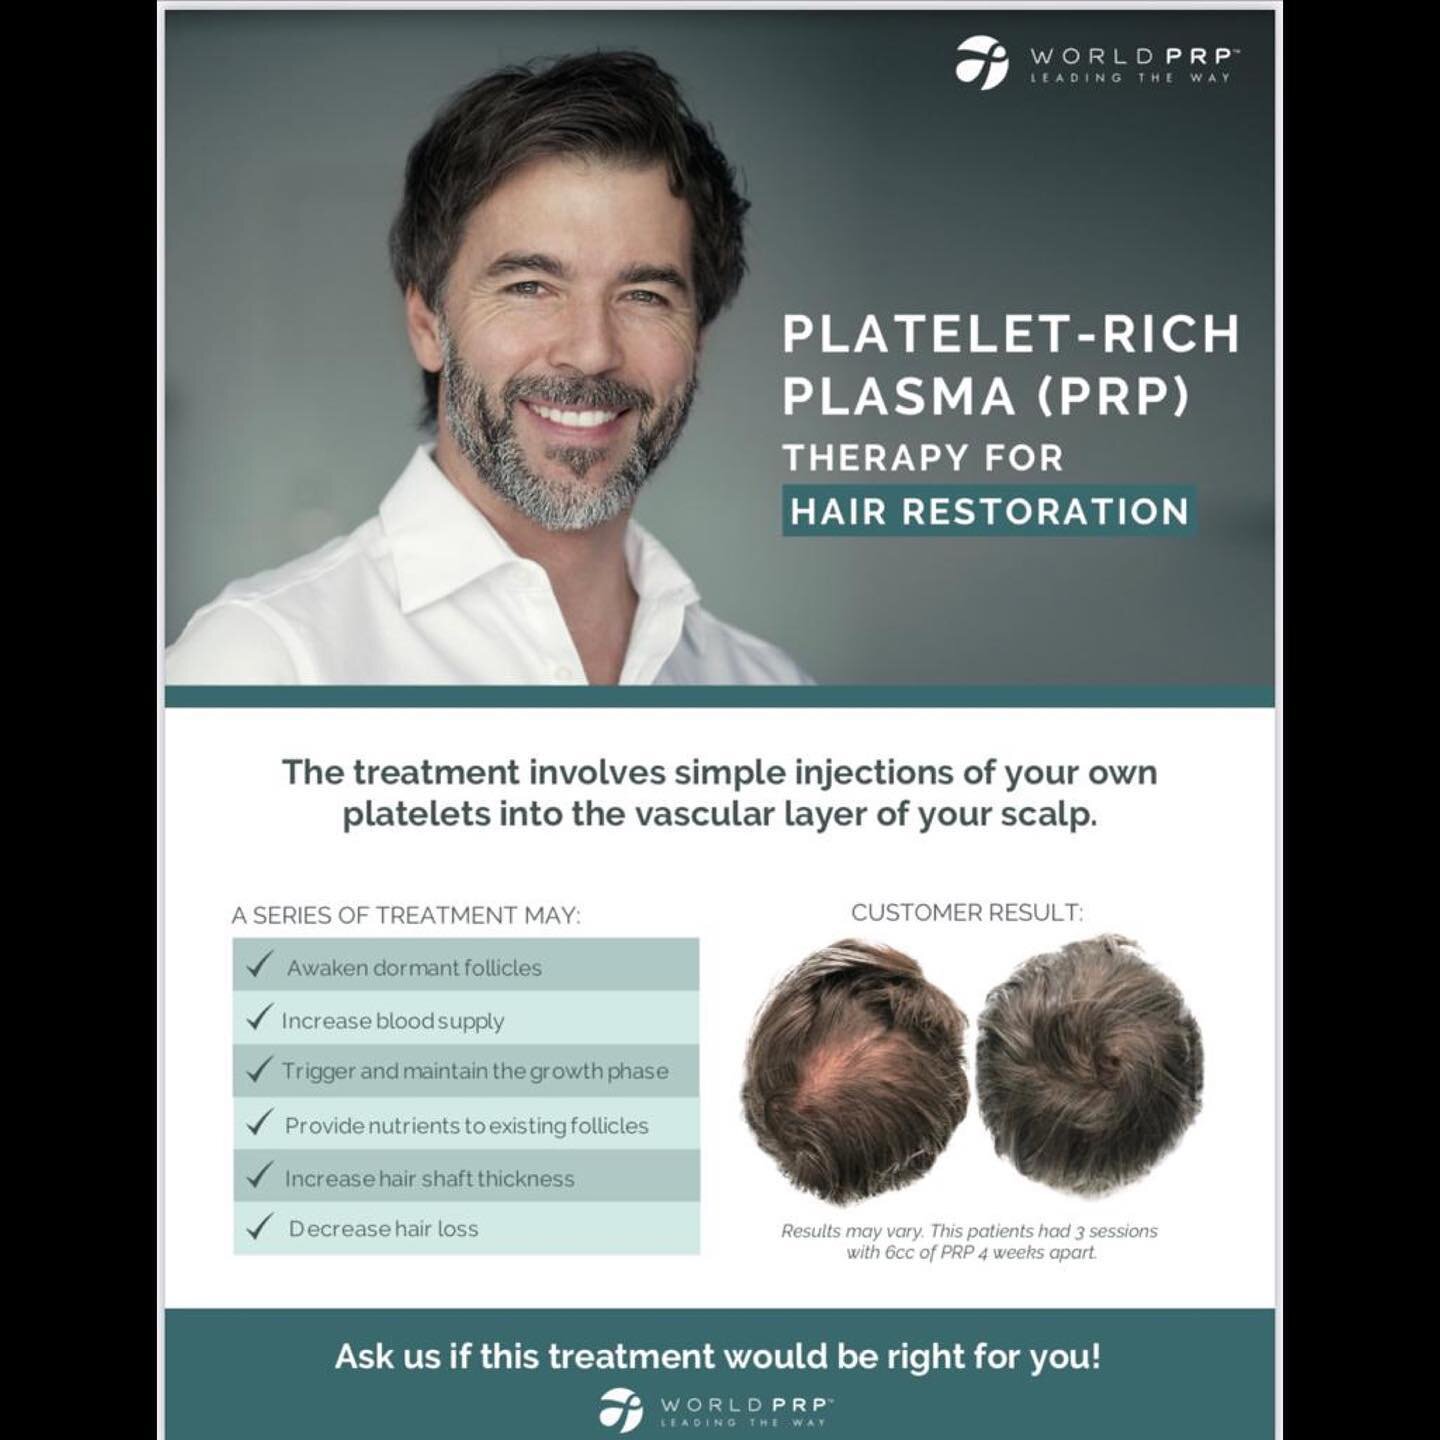 Experiencing hair loss? WorldPRP is now available at the ART Clinic!

Fall promo! World PRP 3 treatment package $1400 (regular price 2250.00) limited time only! 

DM, call or e-mail us to see if you&rsquo;re a candidate and to learn more about WorldP